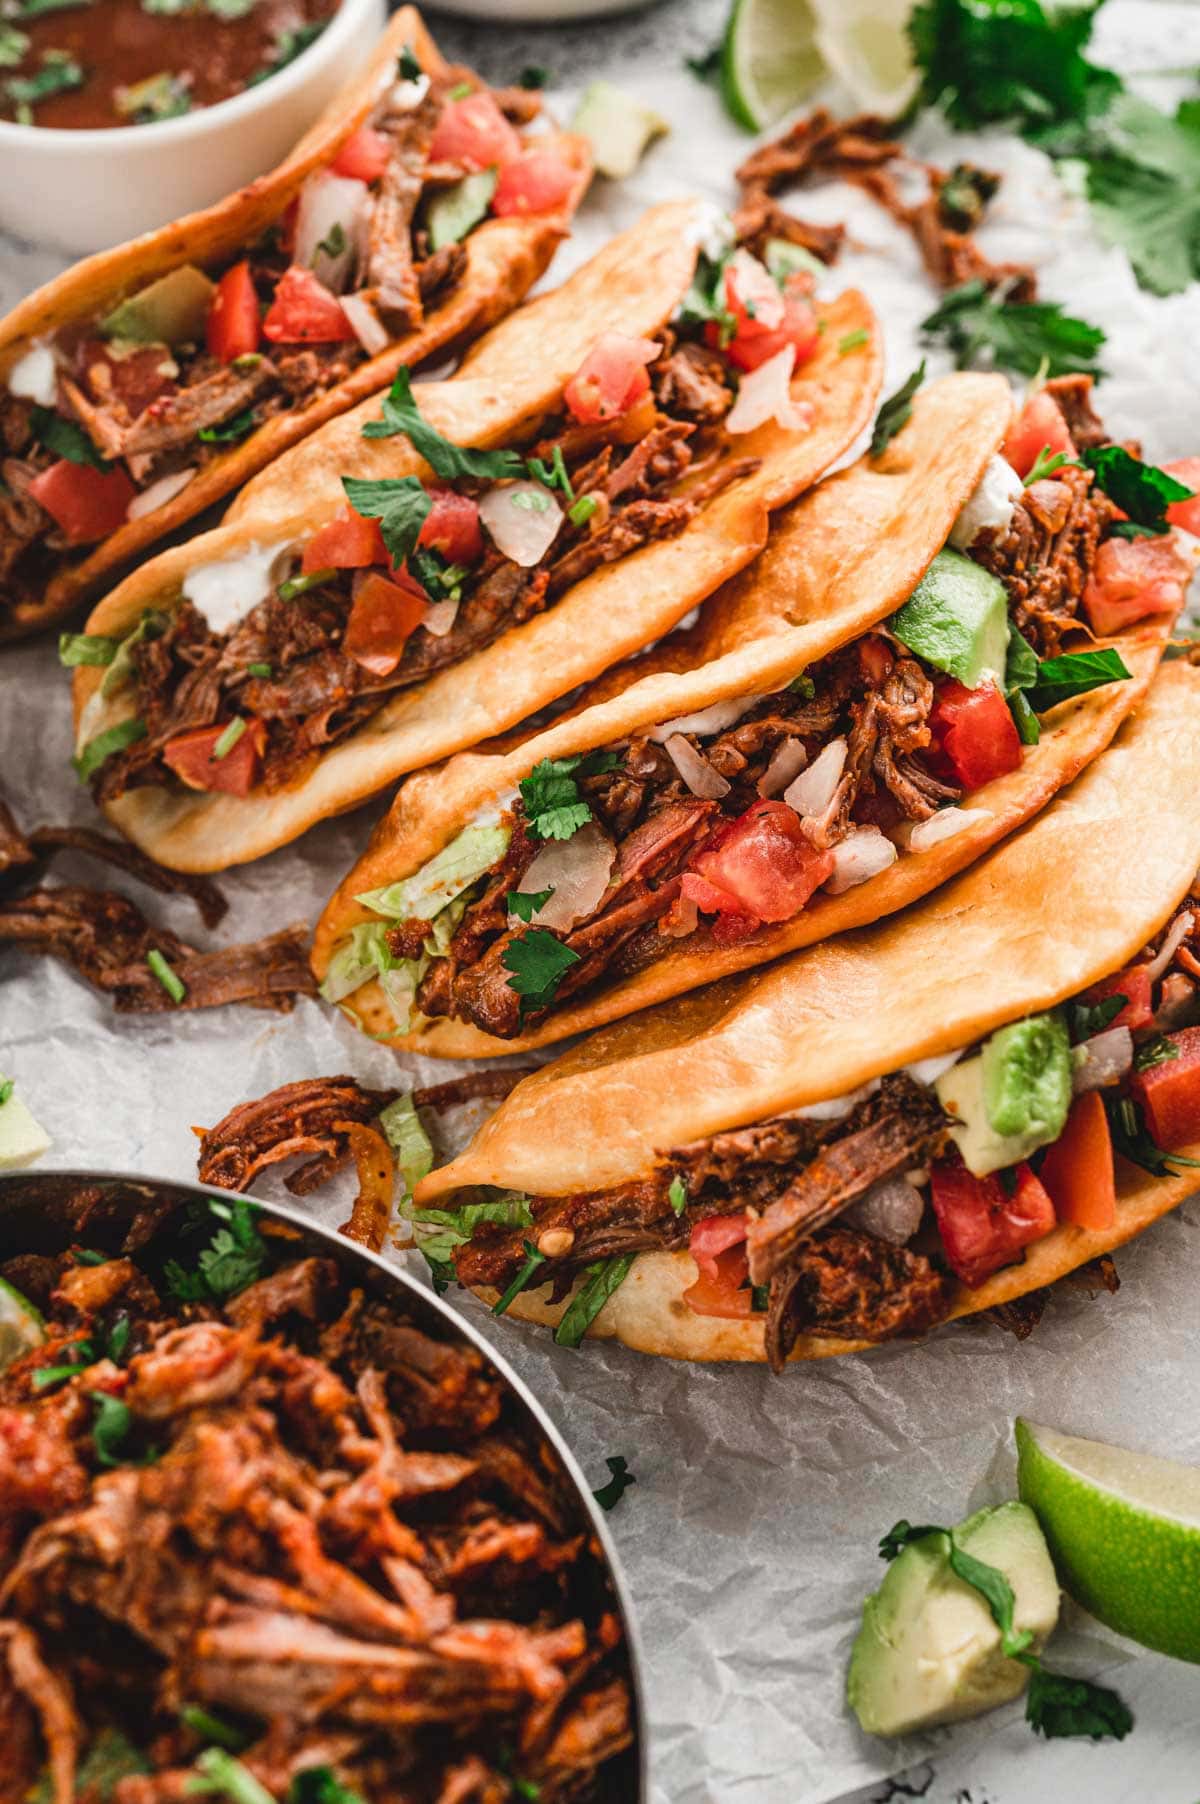 Shredded beef tacos in crispy shels with pico de gallo on top.